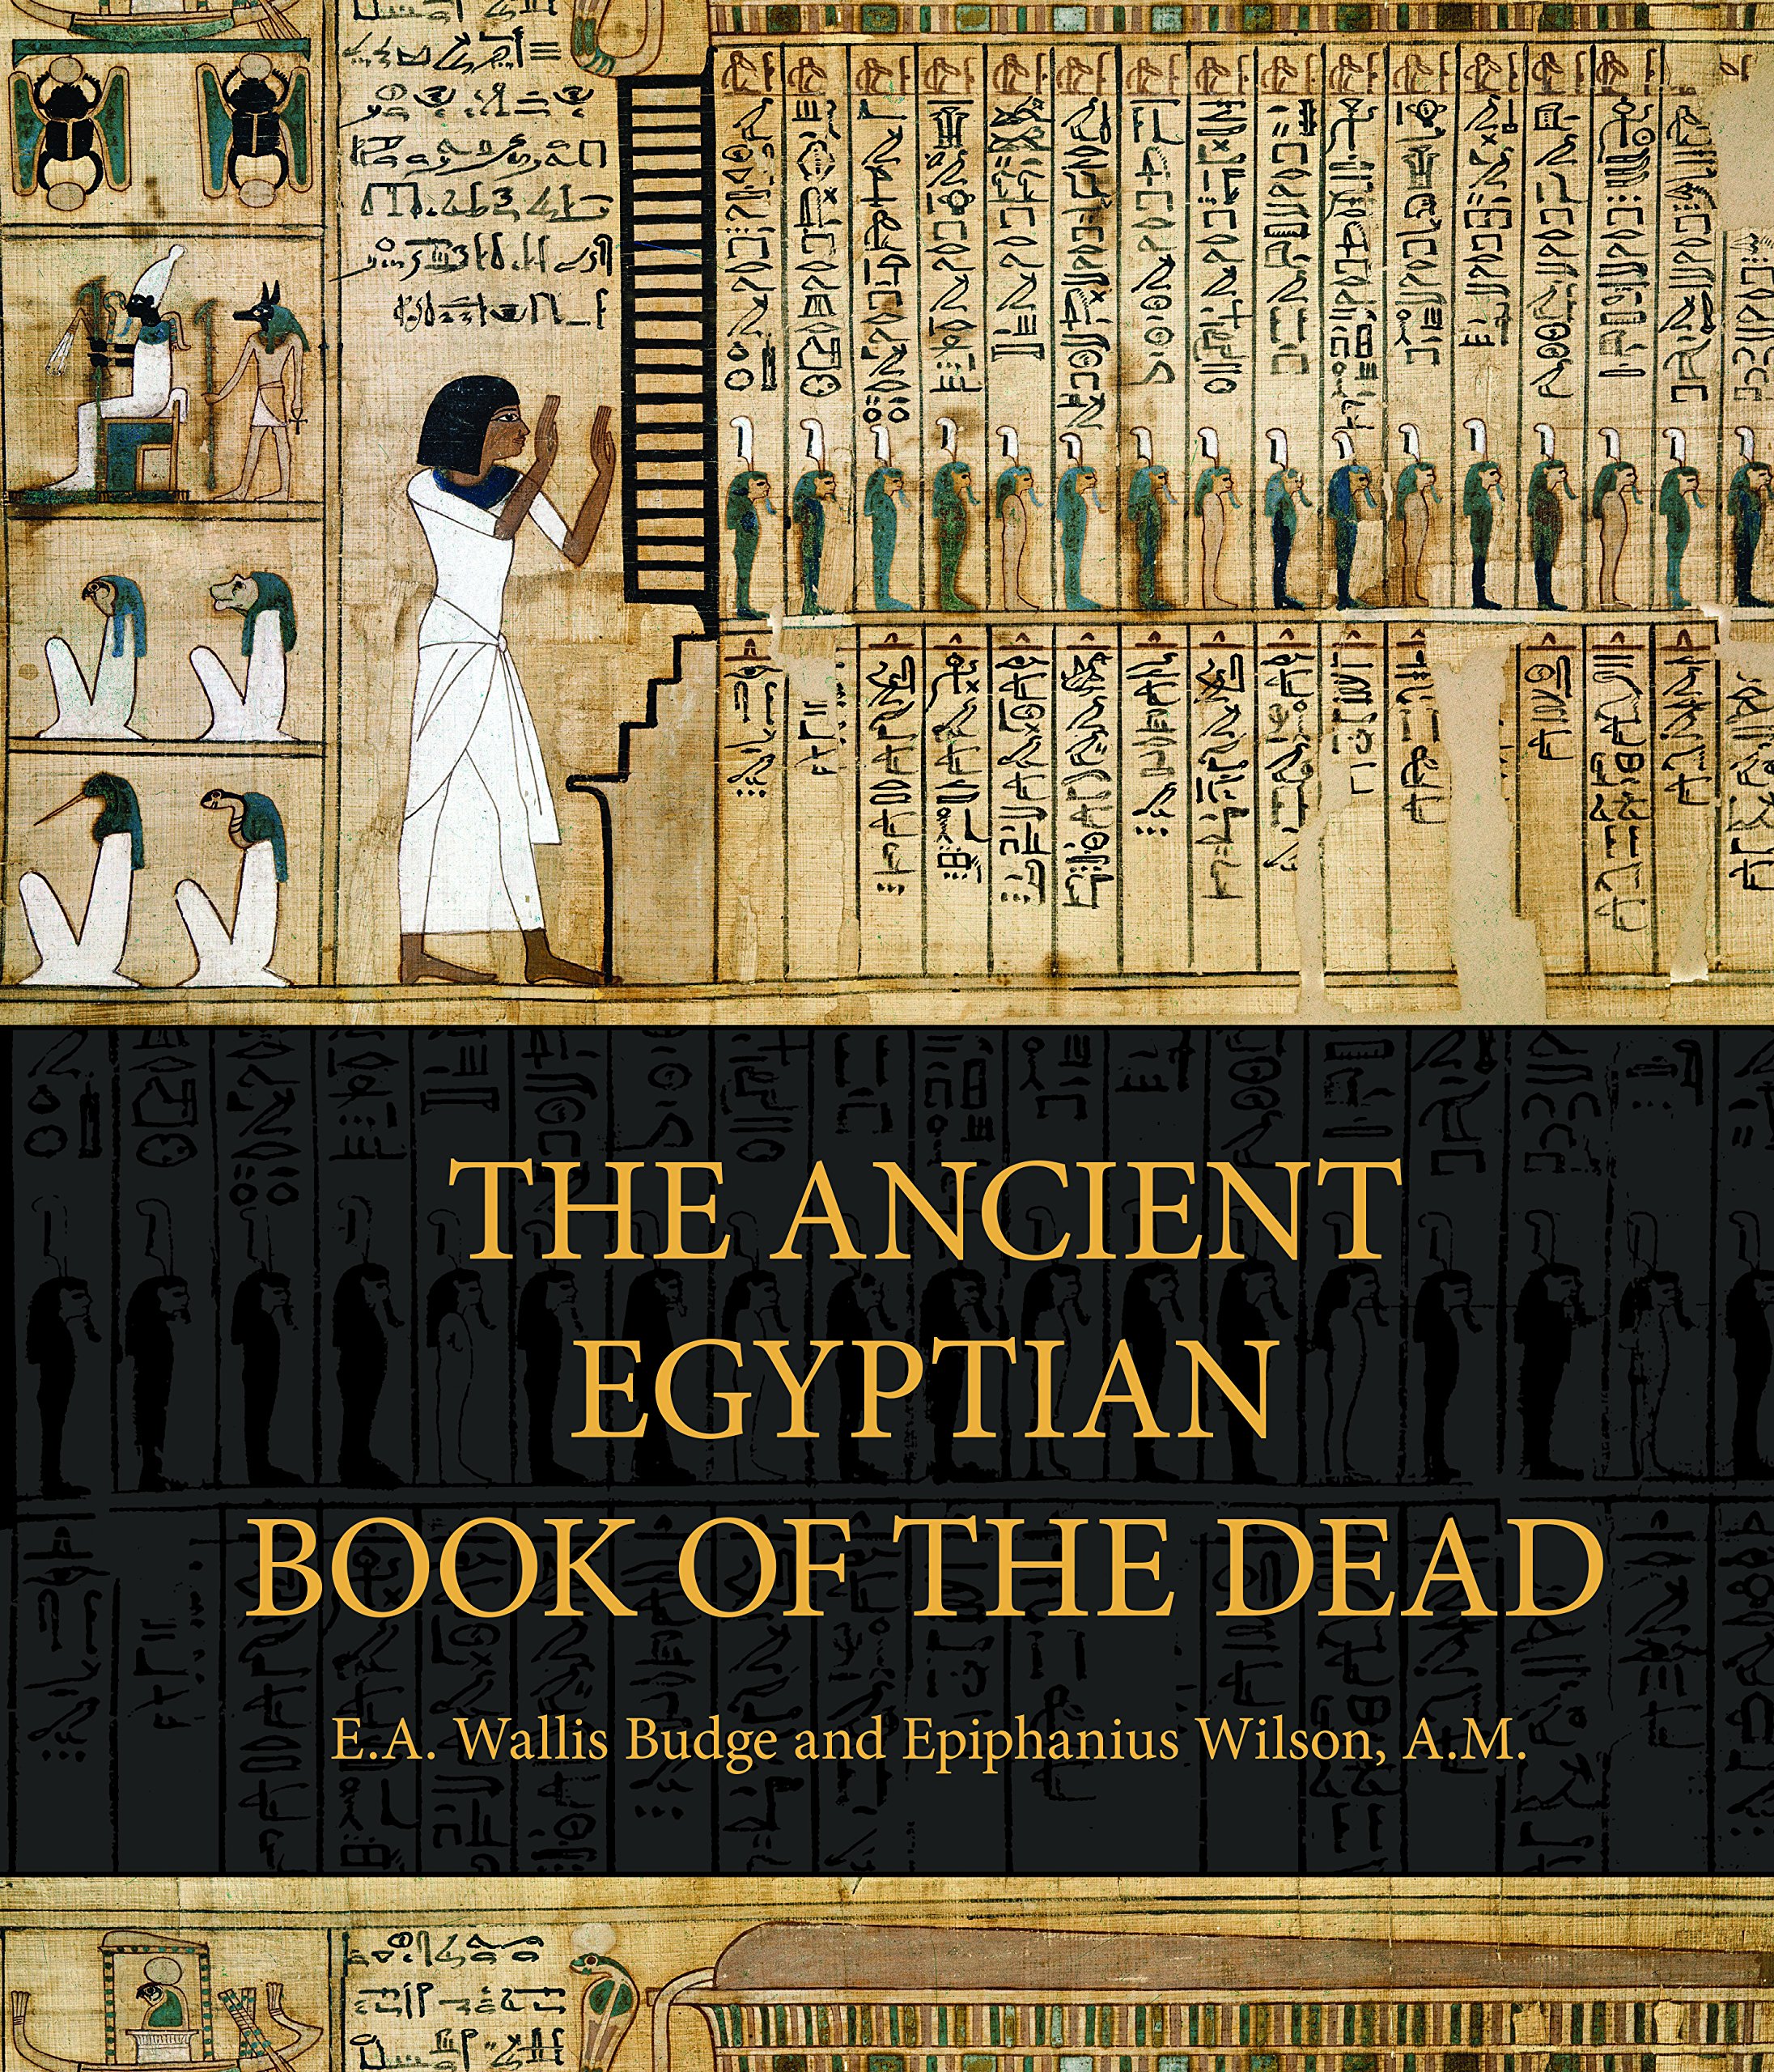 The Ancient Egyptian Book of the Dead | E. A. Wallis Budge